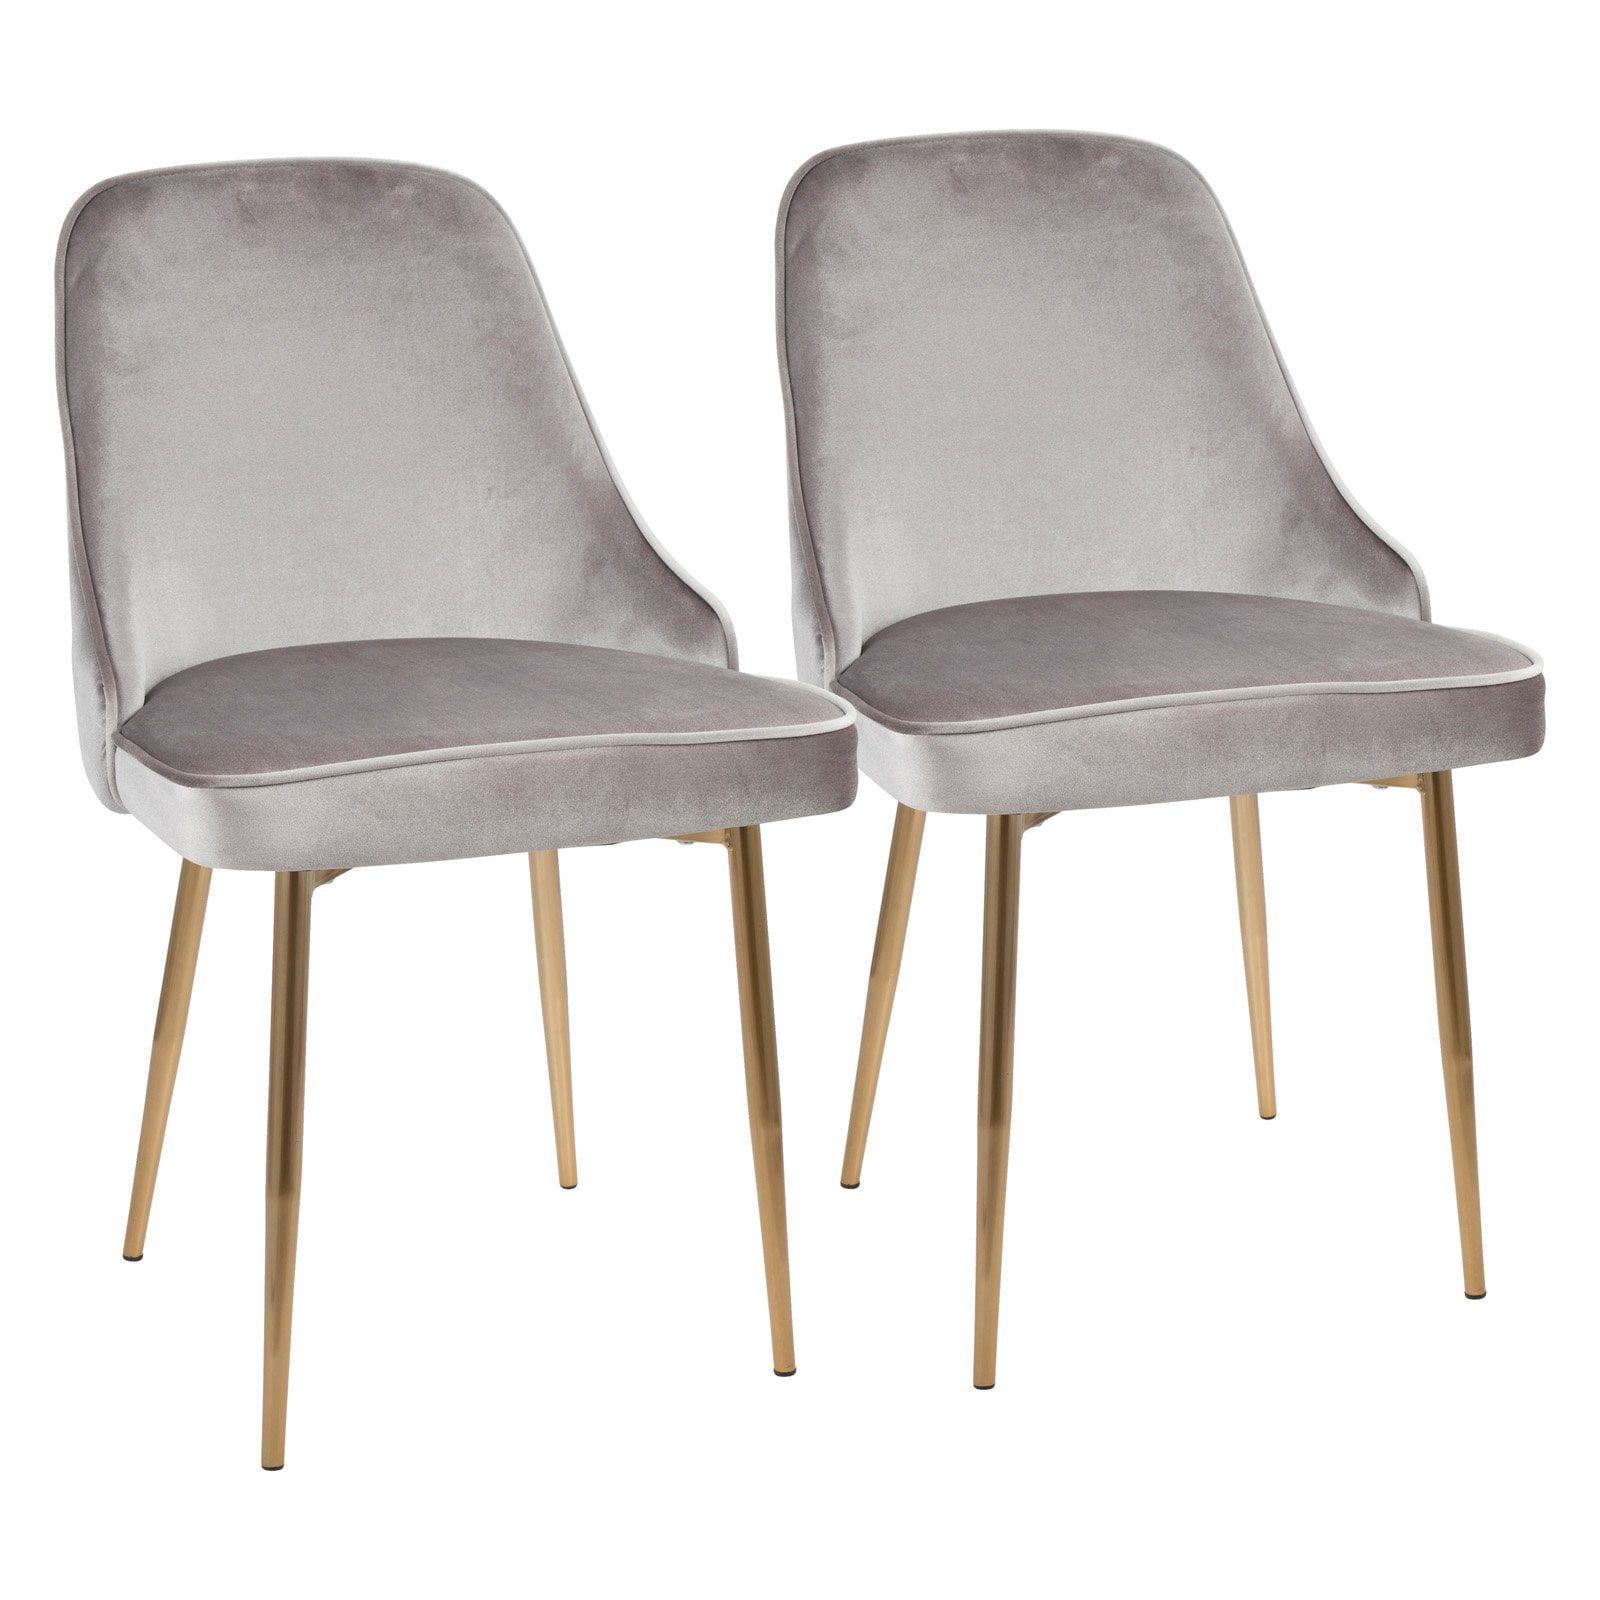 Set of 2 Gray Velvet Upholstered Dining Chairs with Gold Tapered Legs